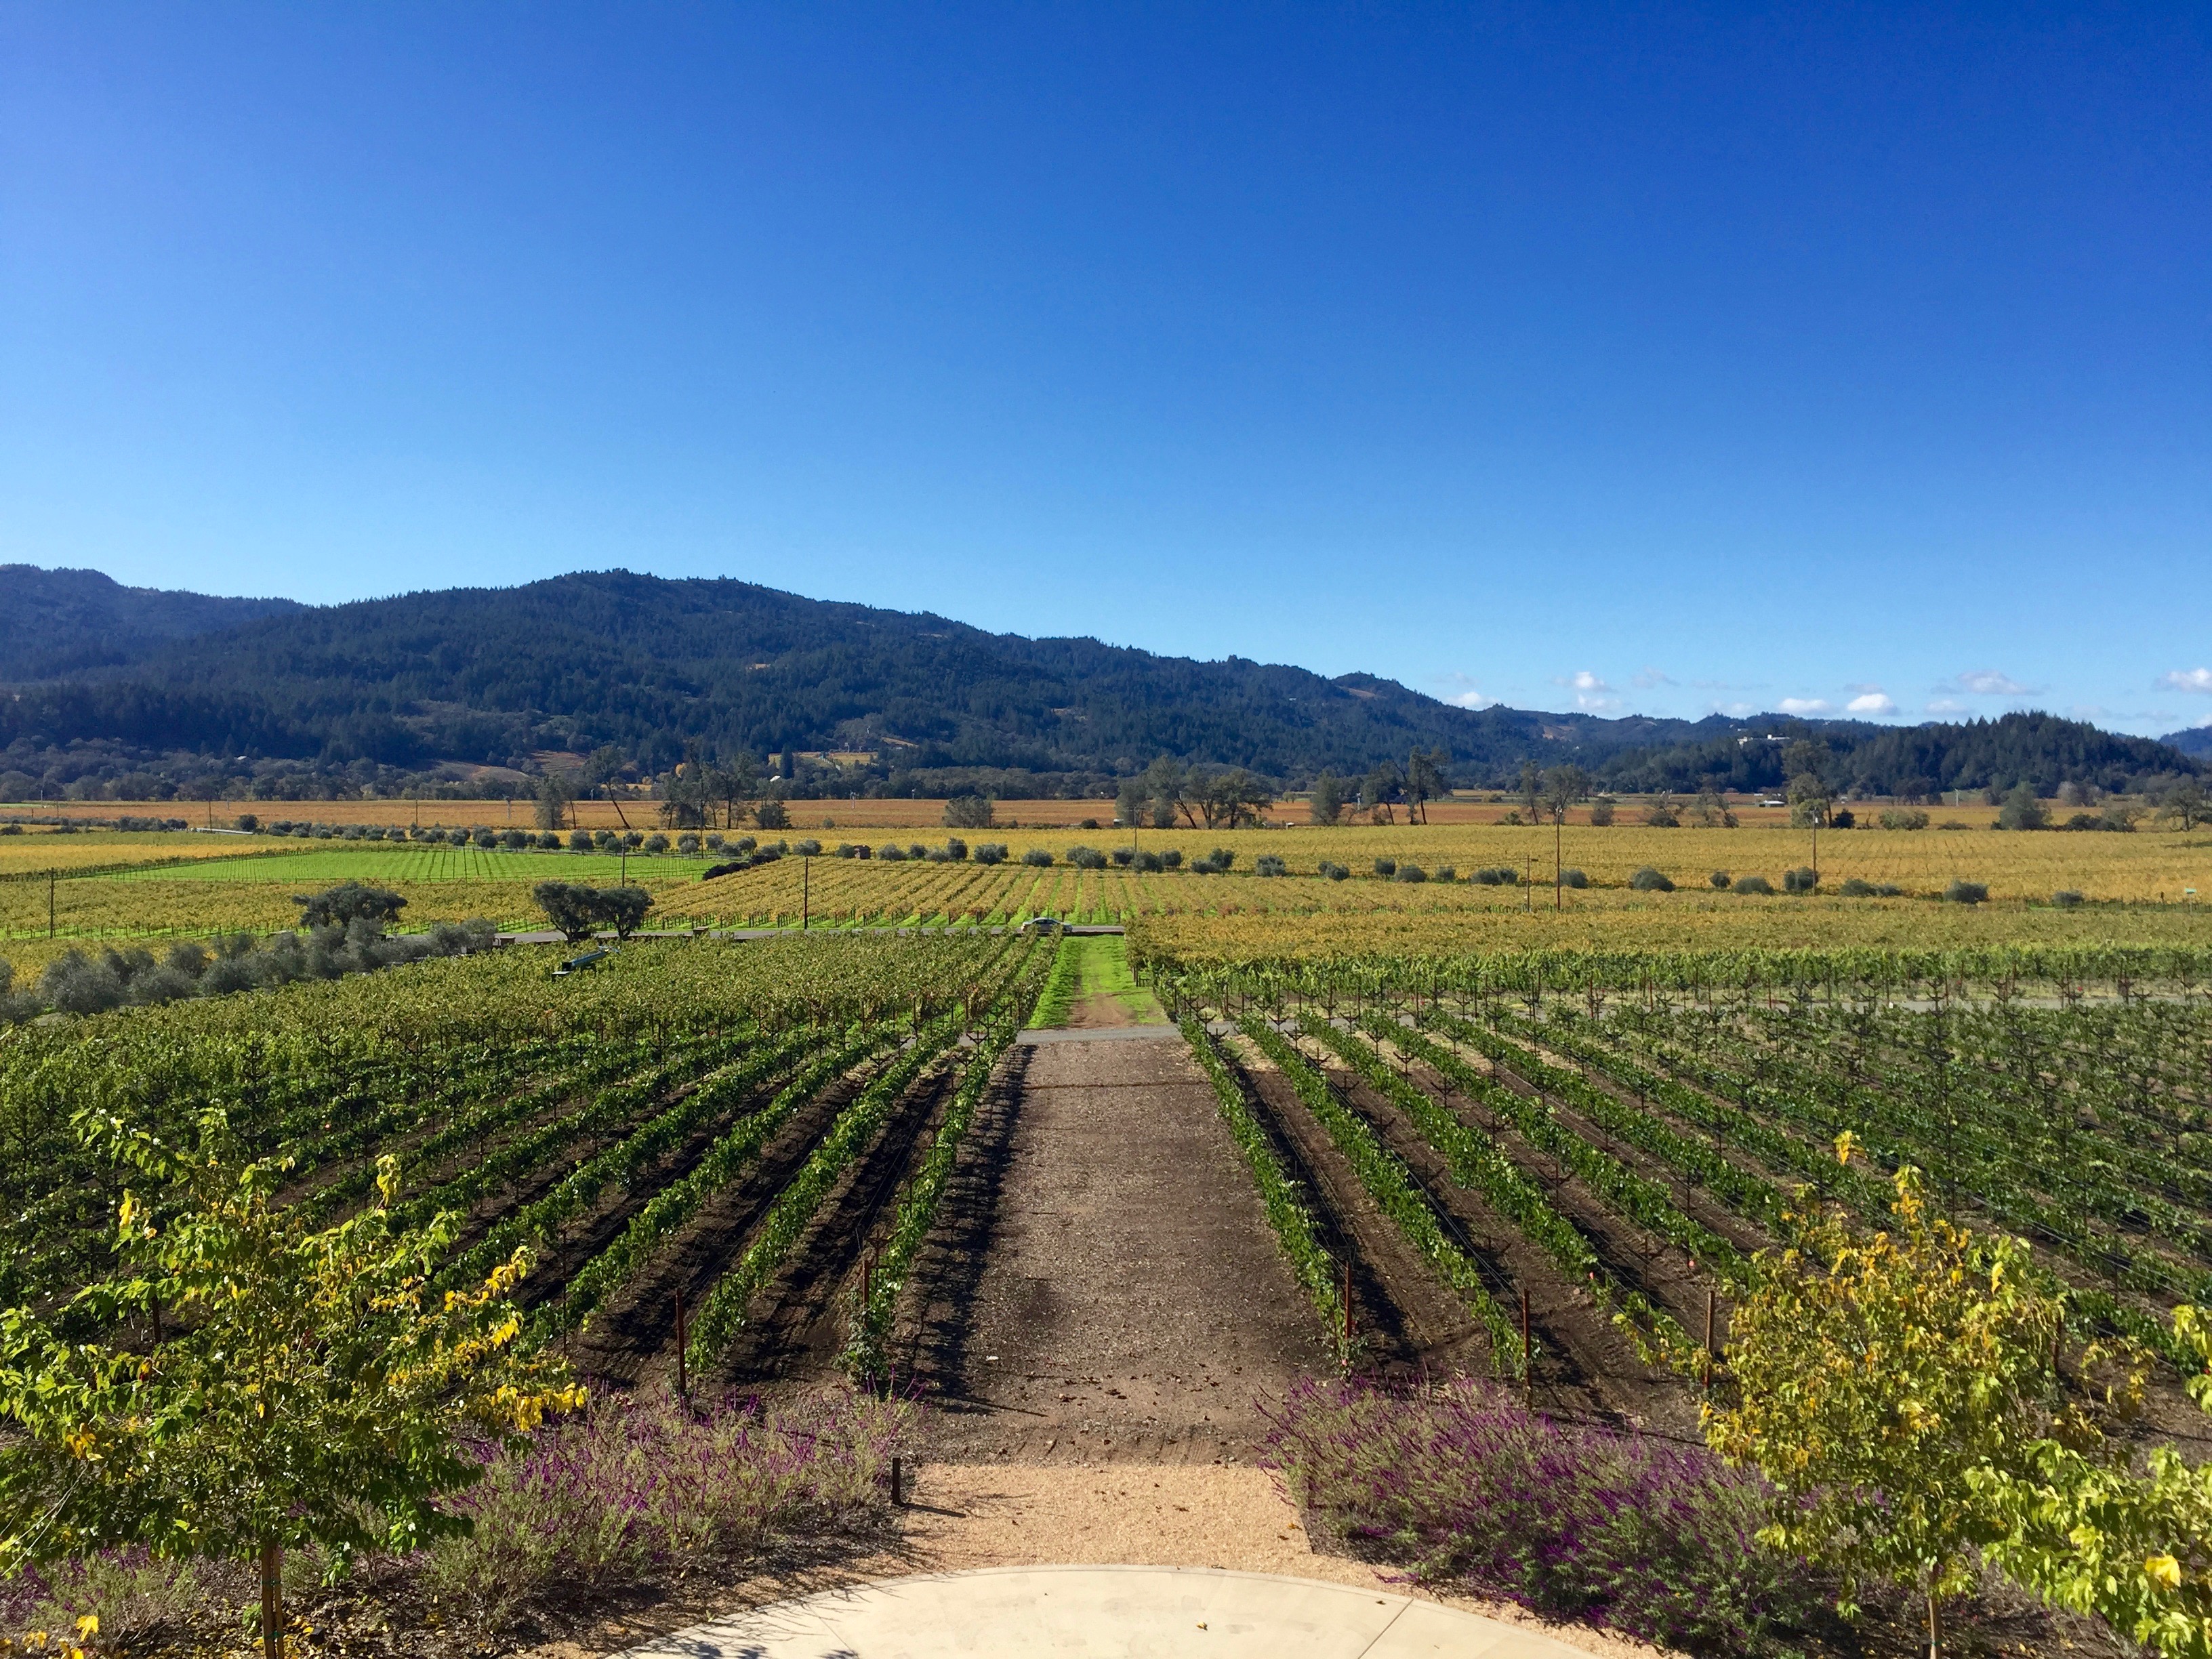 Where to Eat, Drink & Stay in Calistoga